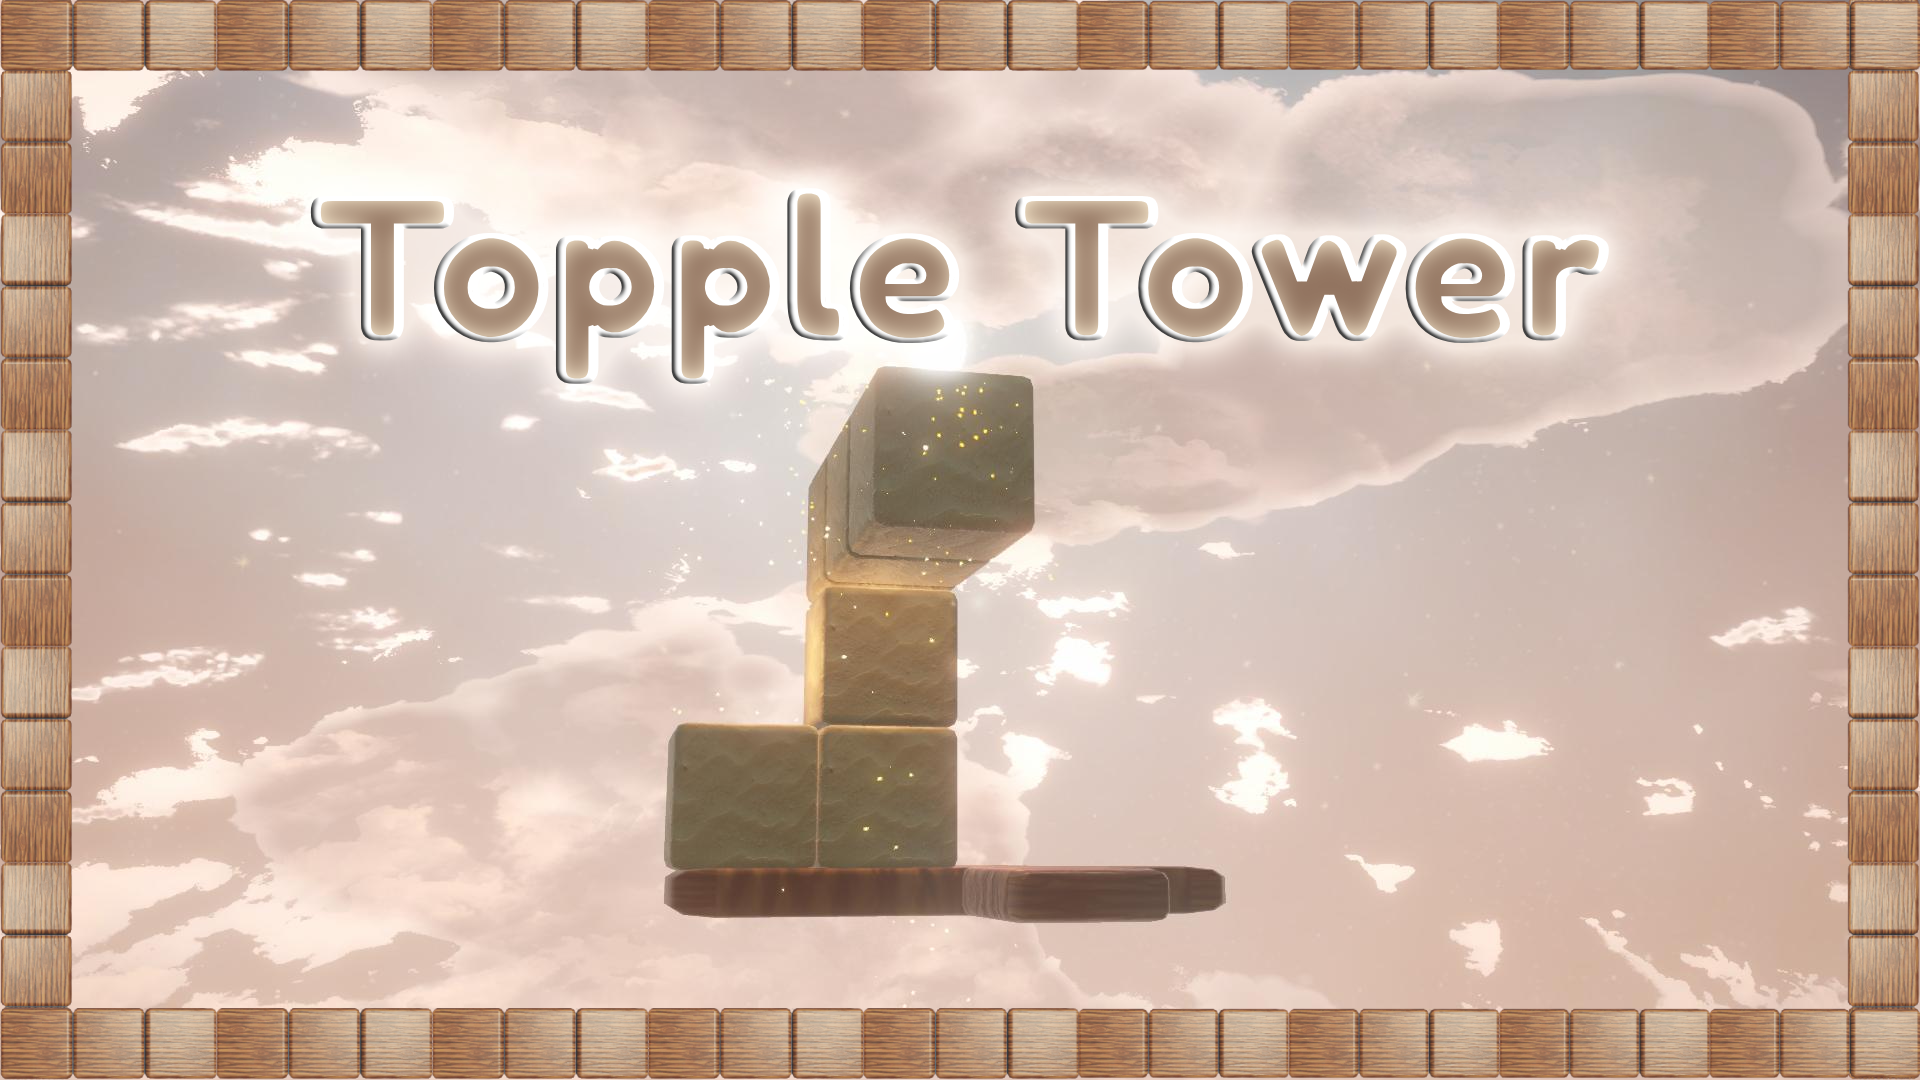 Topple Tower - Tower Building